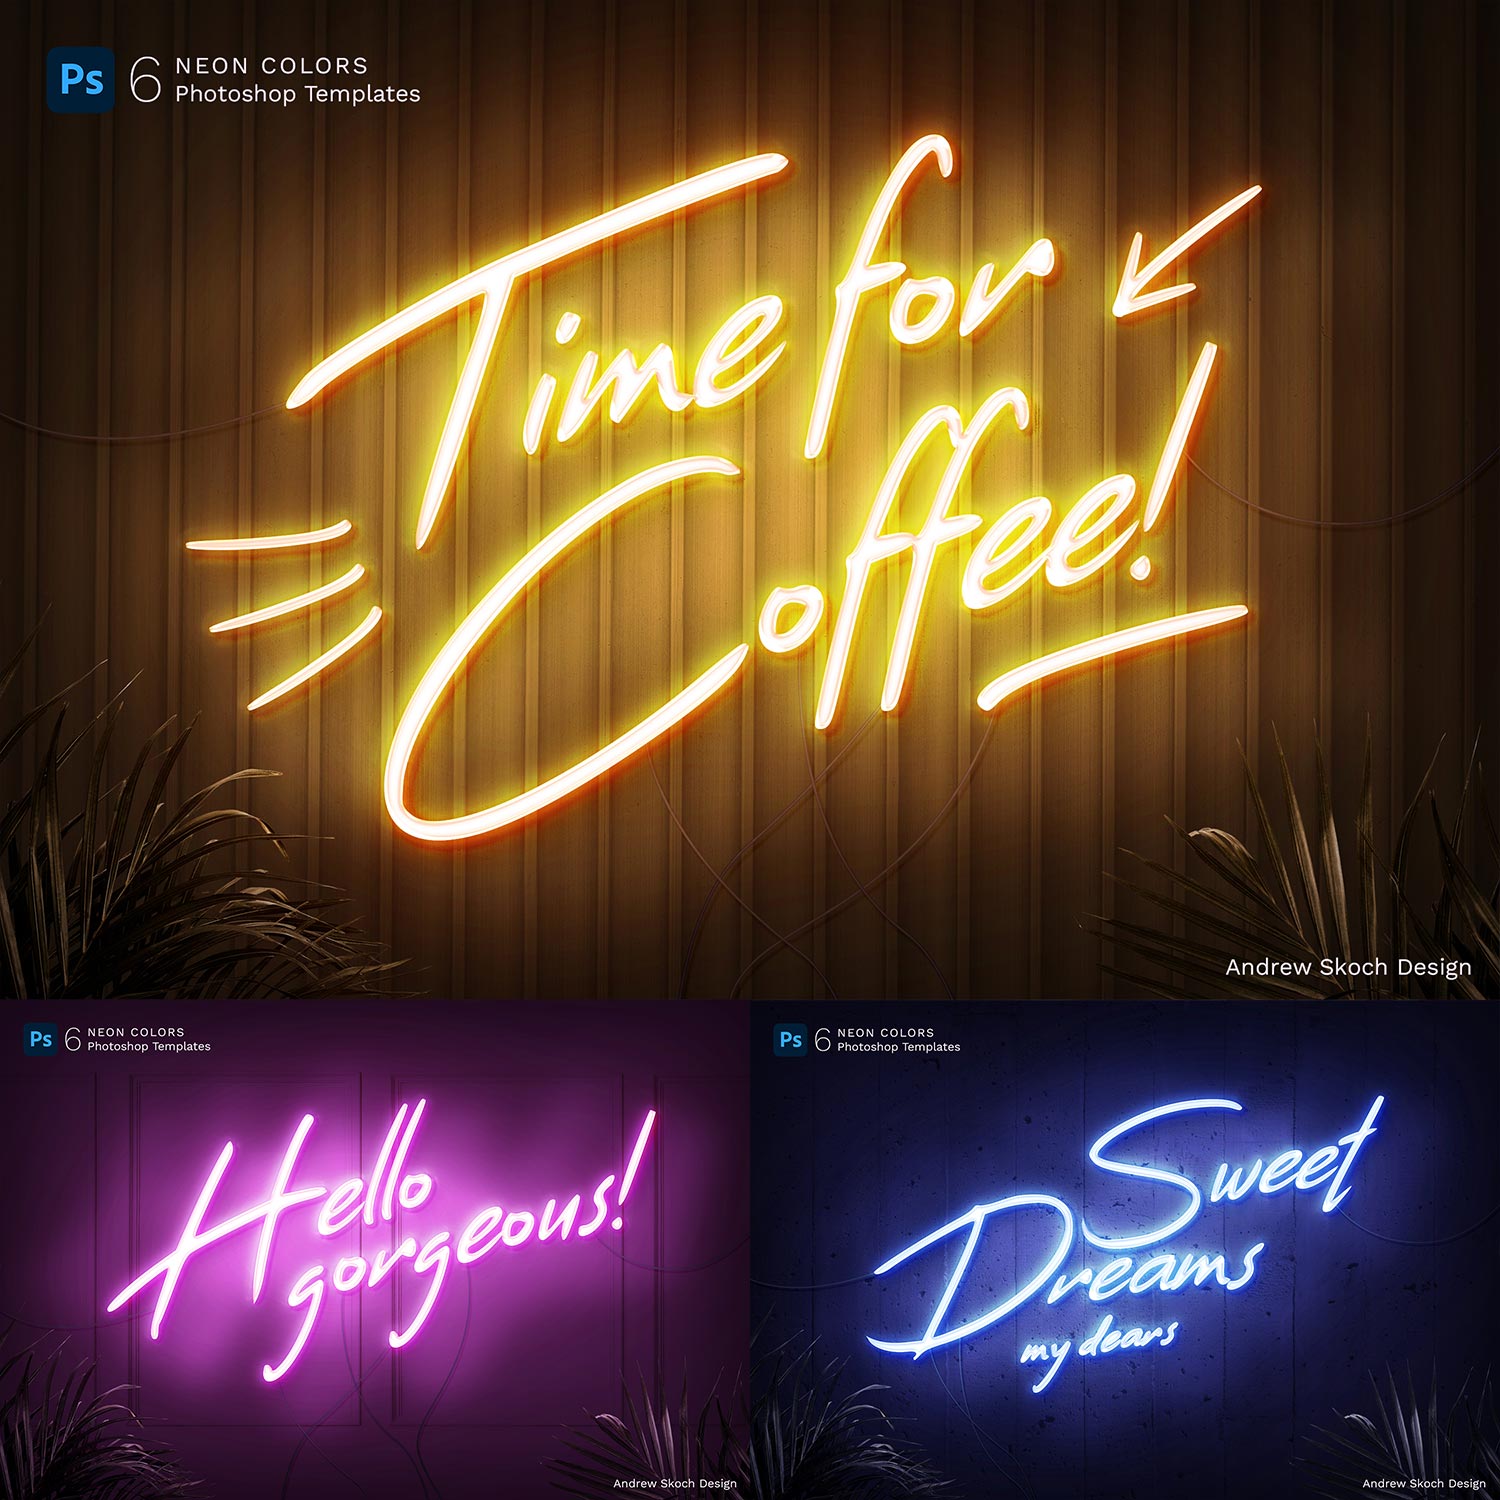 Neon Sign Templates preview image.